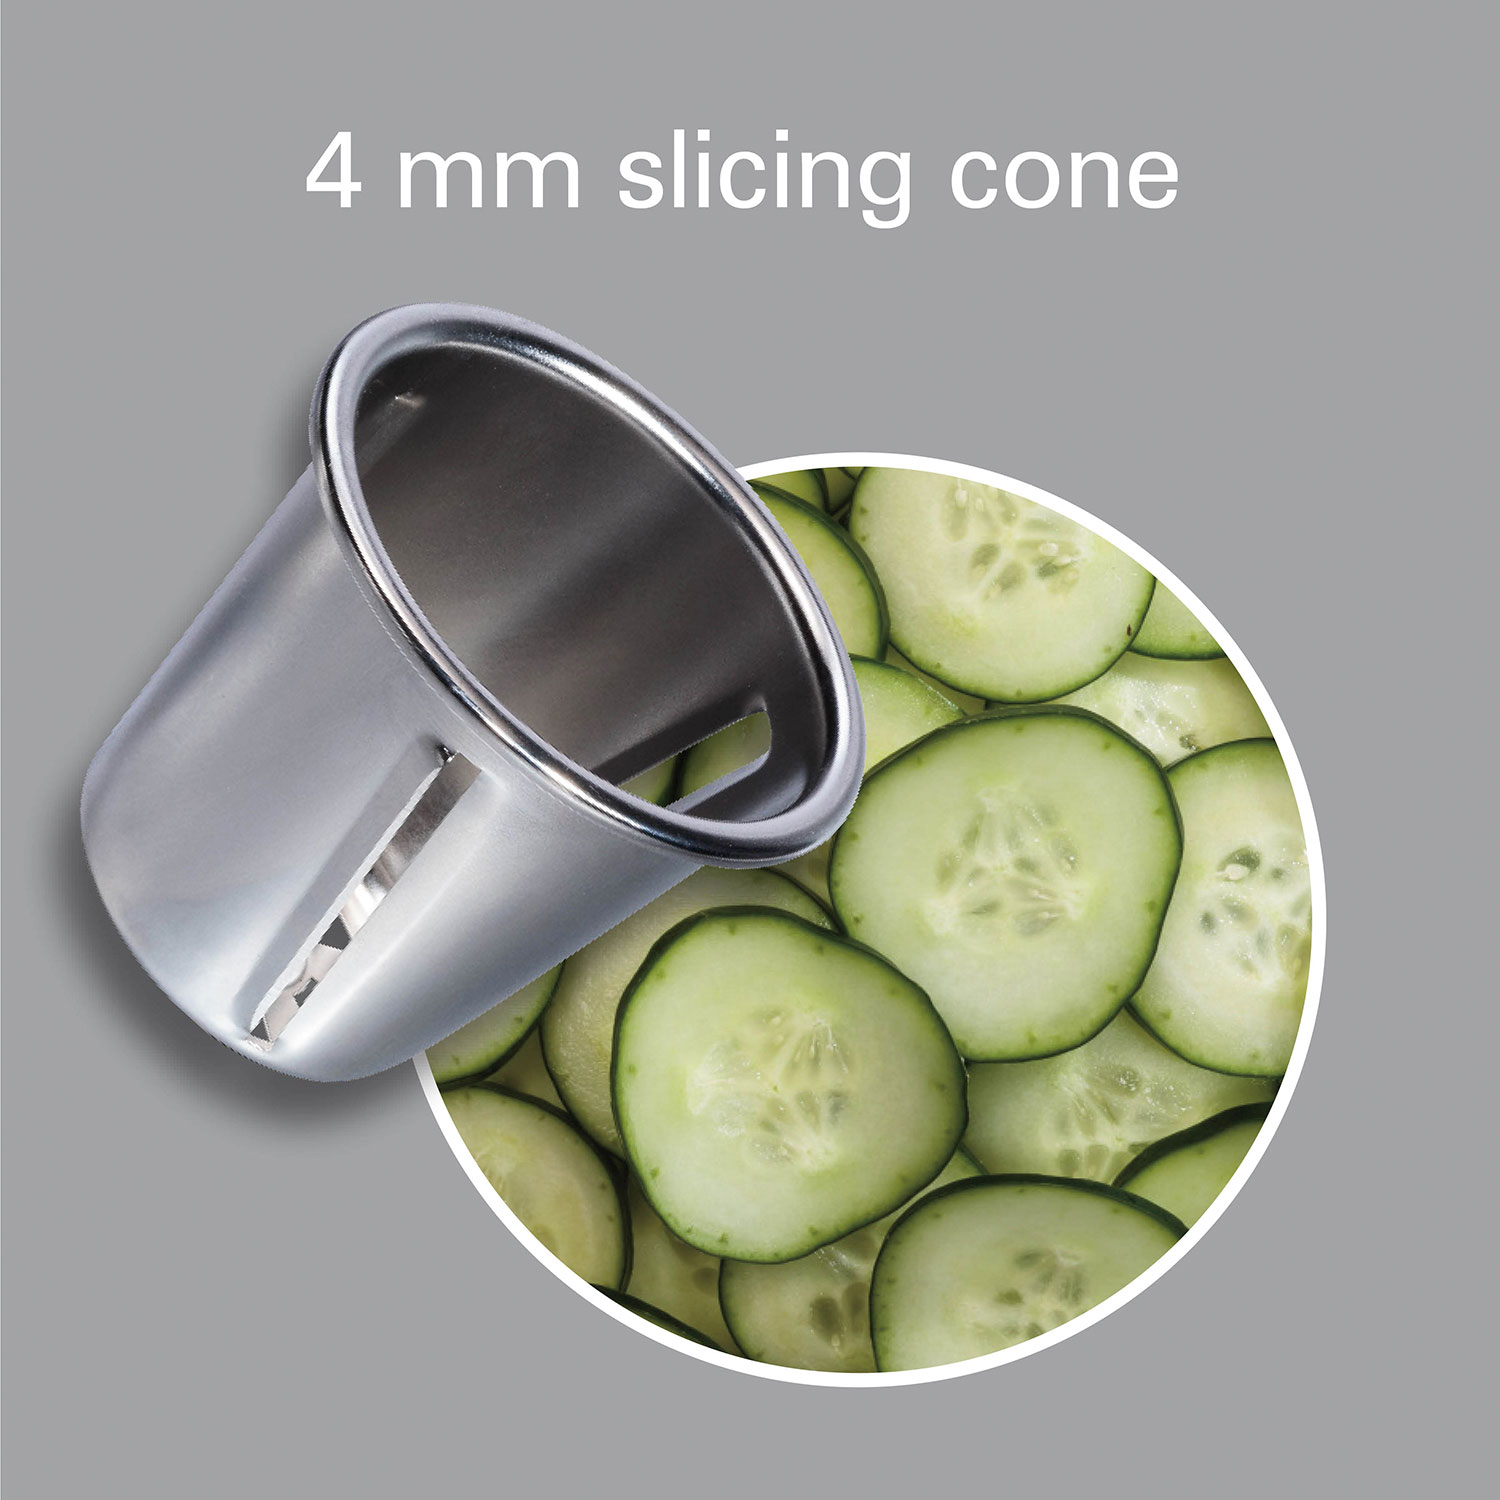 Stainless Steel Slicer Shredder Attachment with 3 Sizes Blades for